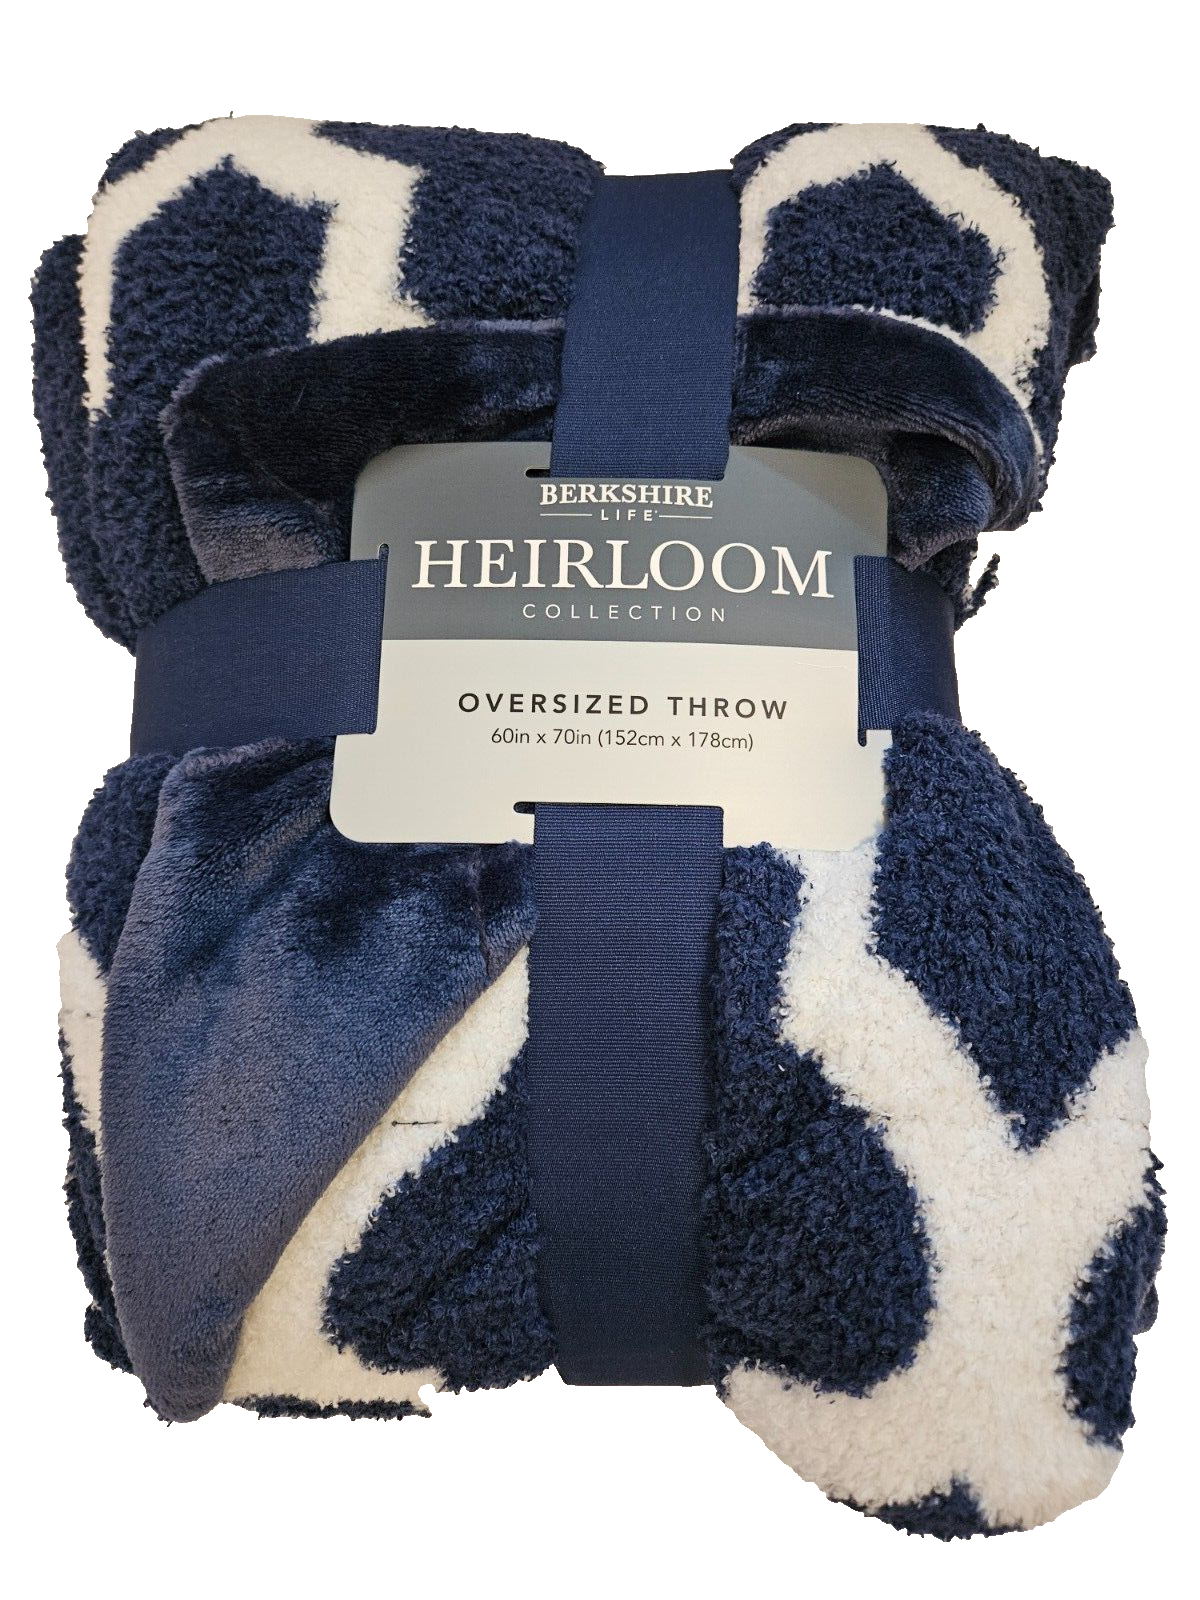 Berkshire Life Heirloom Collection Oversized Throw 60" X 70" 100% Polyester NEW - $23.81